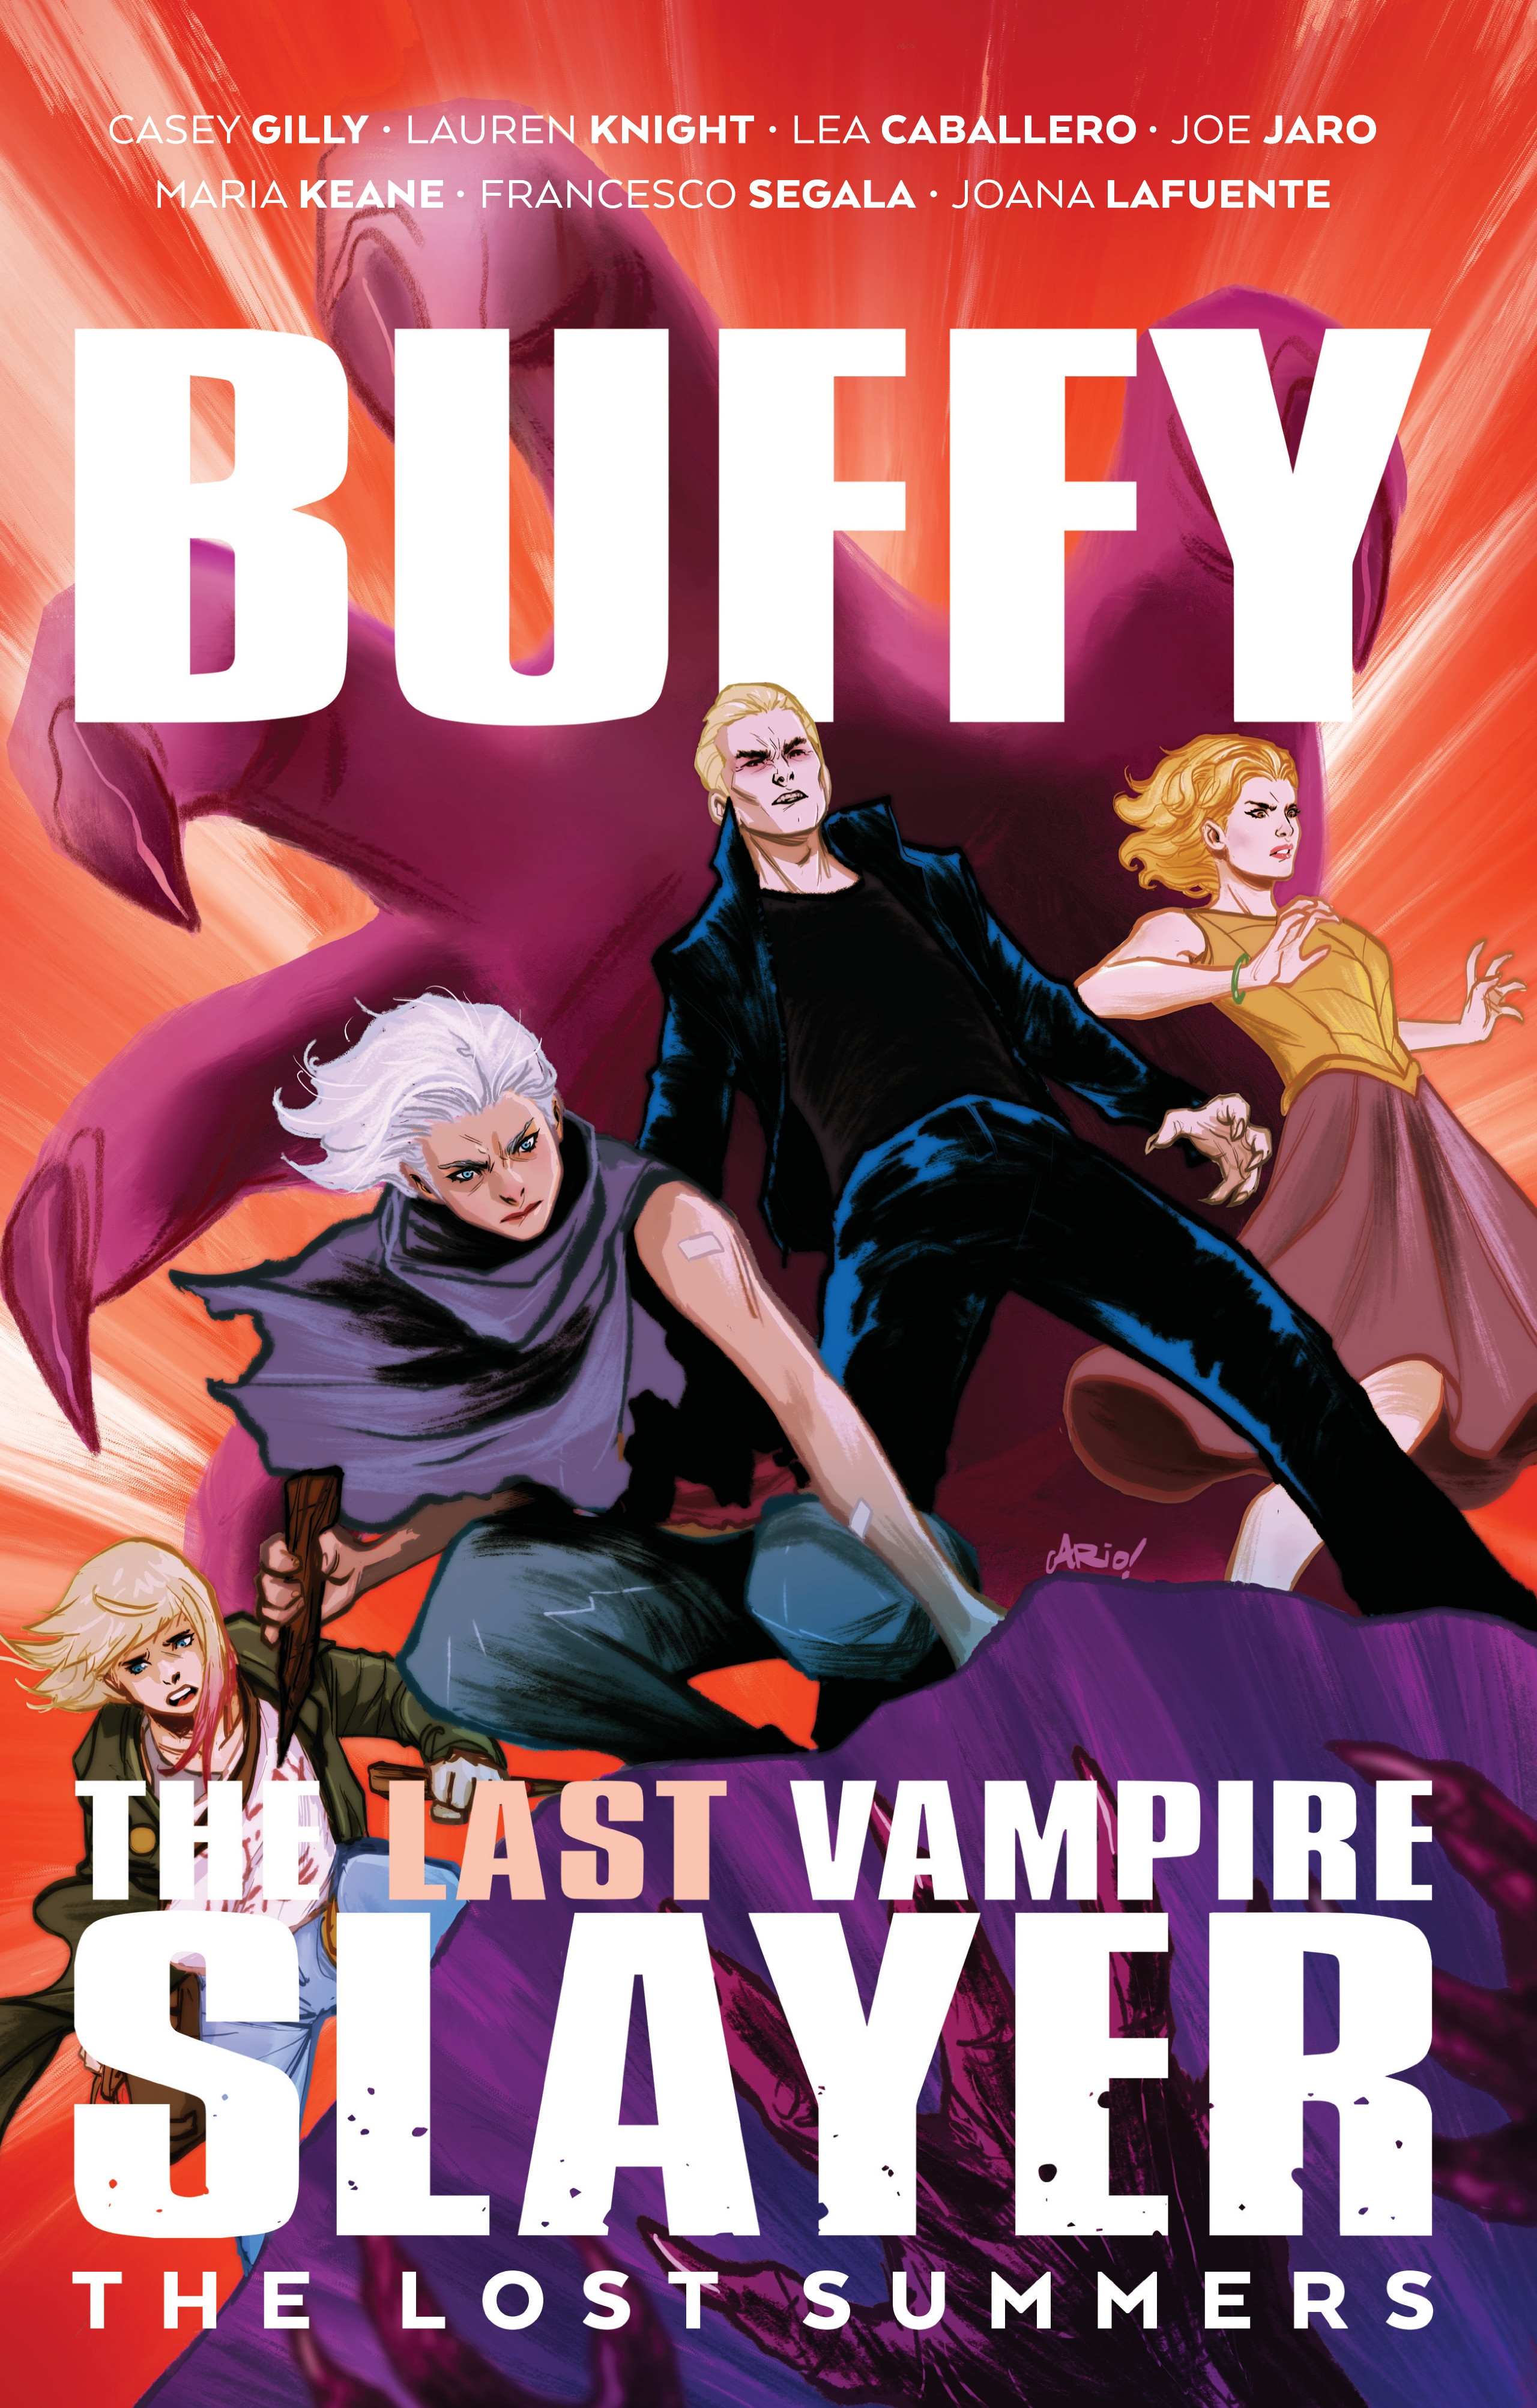 Read online Buffy the Last Vampire Slayer: The Lost Summers comic -  Issue # TPB - 1